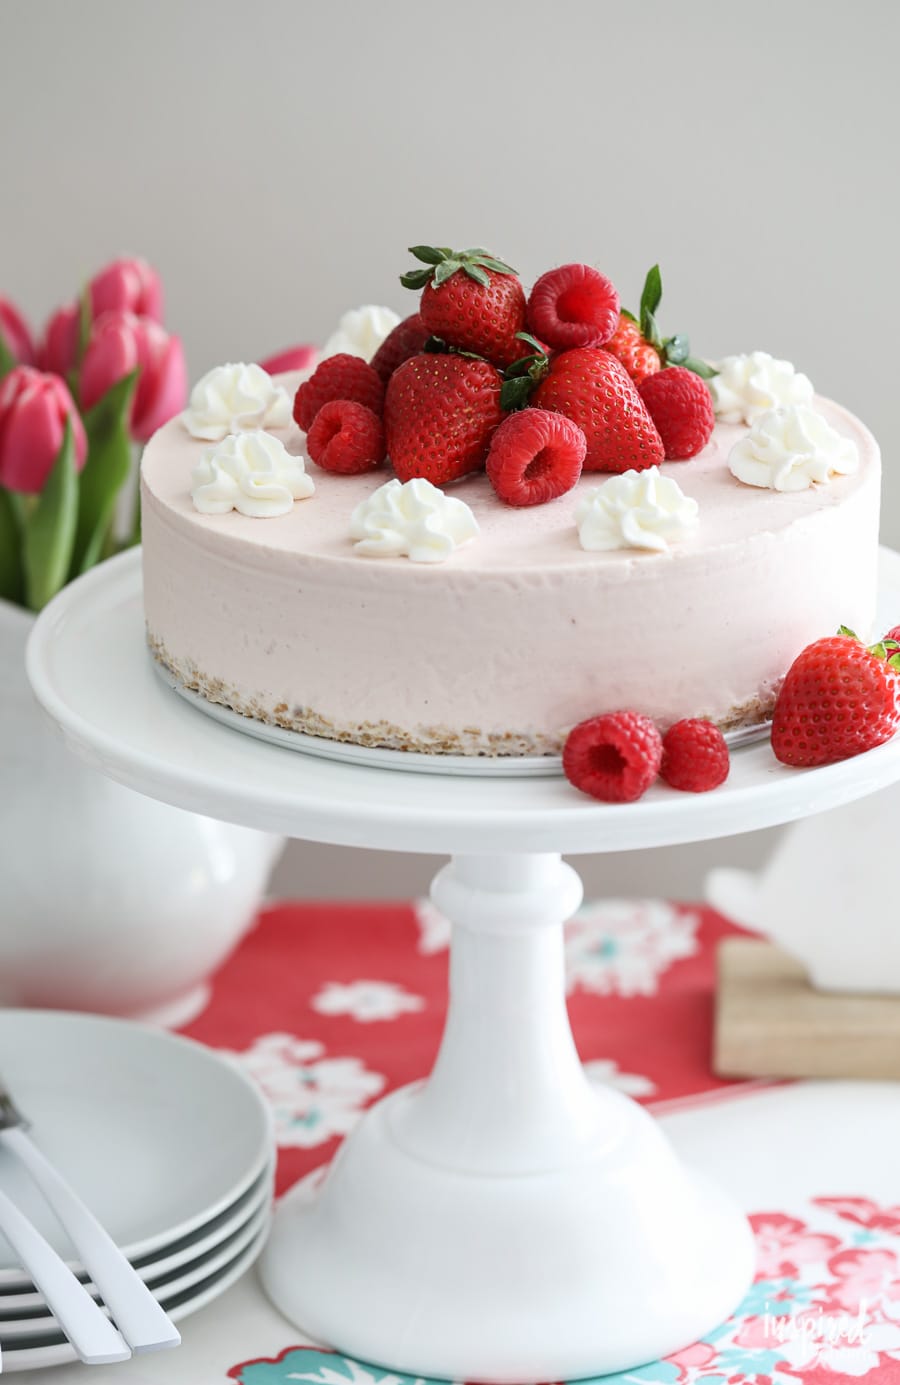 strawberry ice cream cheesecake on a cake stand topped with fresh berries.